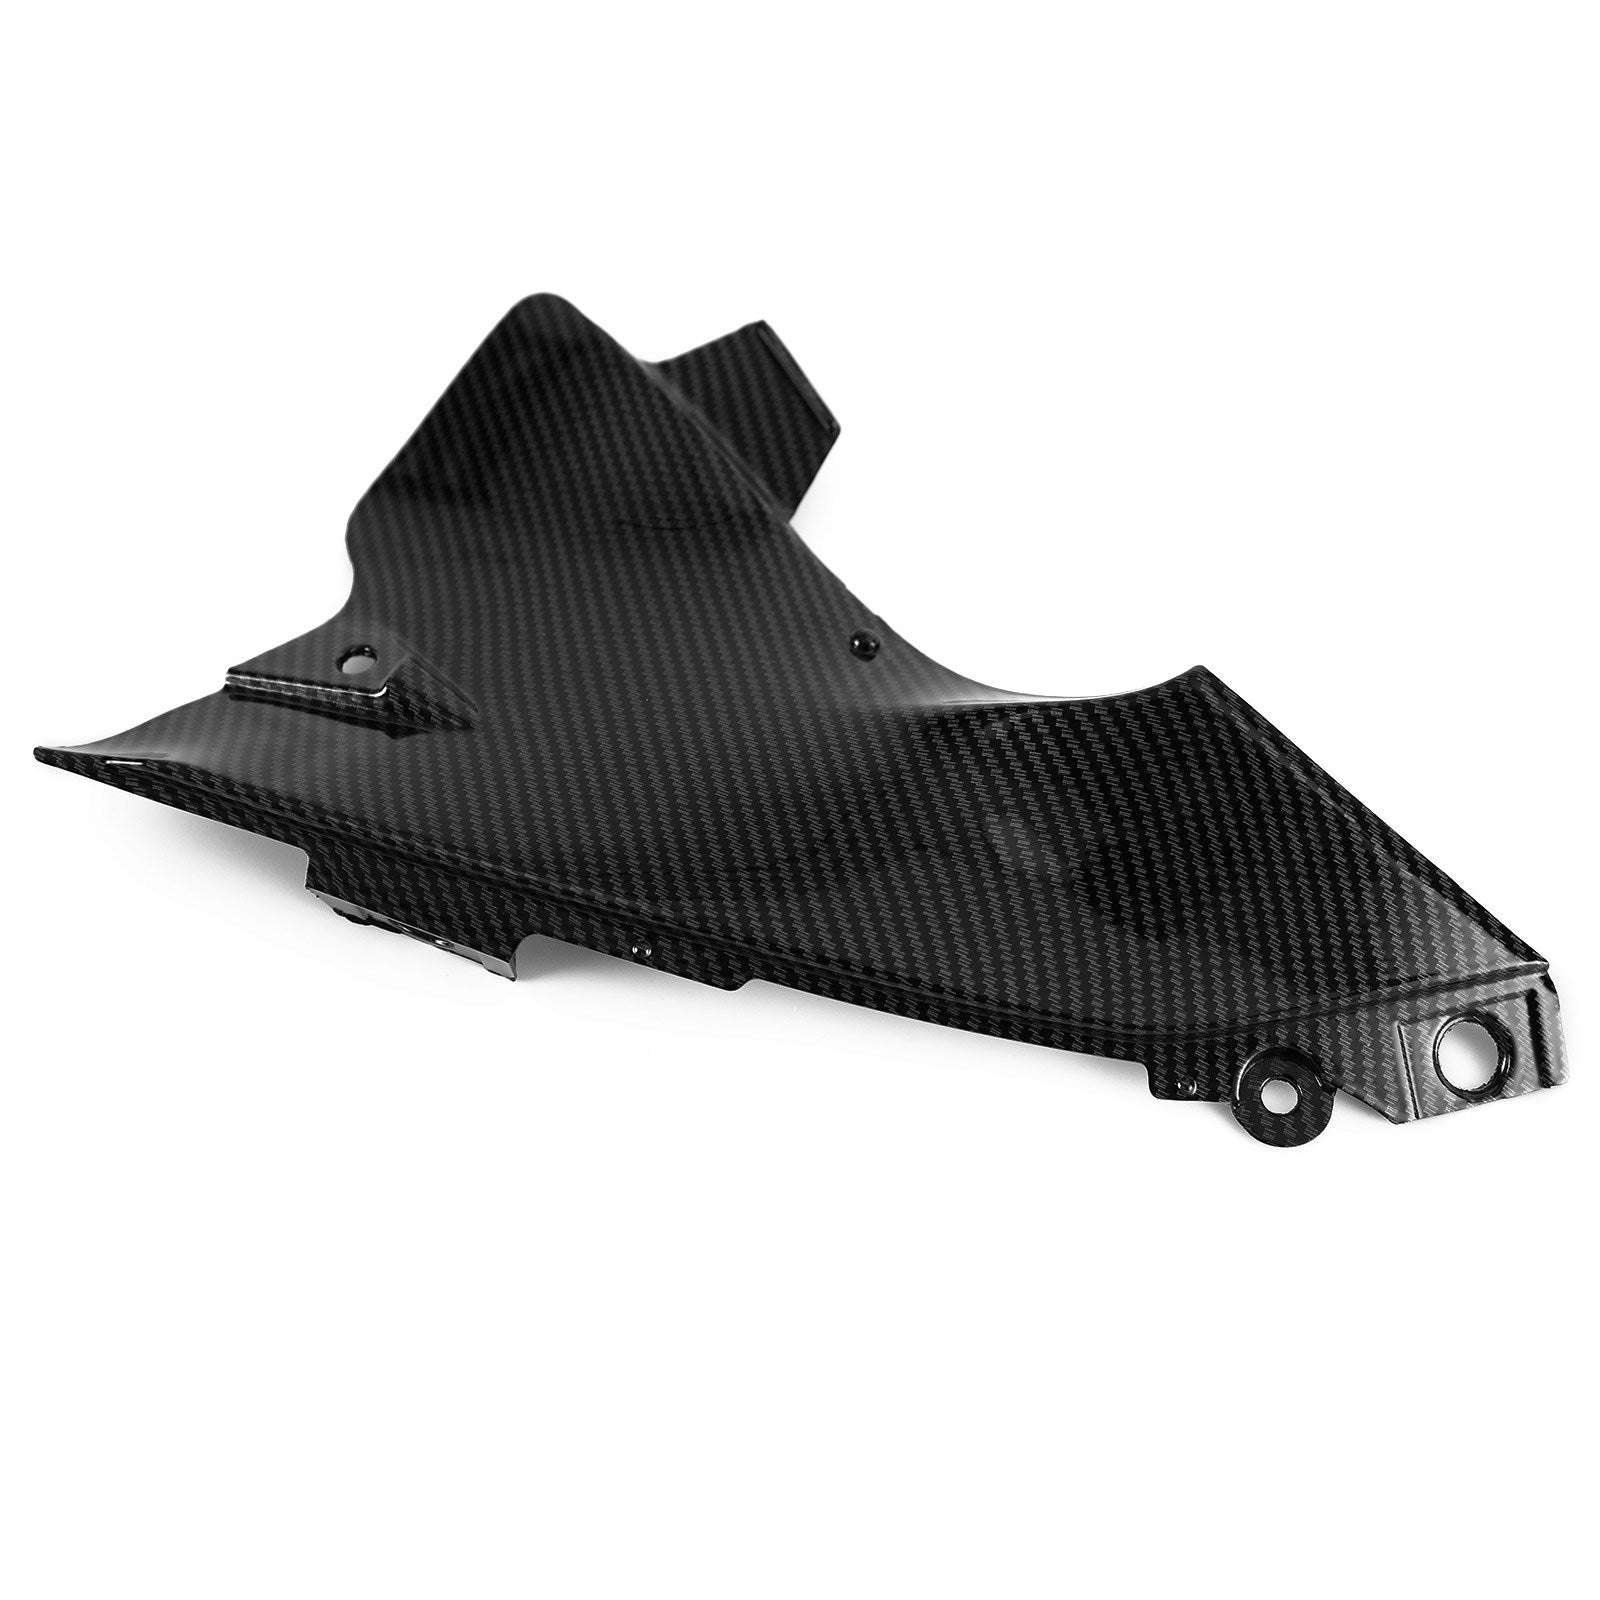 Areyourshop Side Trim Air Duct Cover Panel Fairing Cowling for Yamaha YZF R1 2004-2006